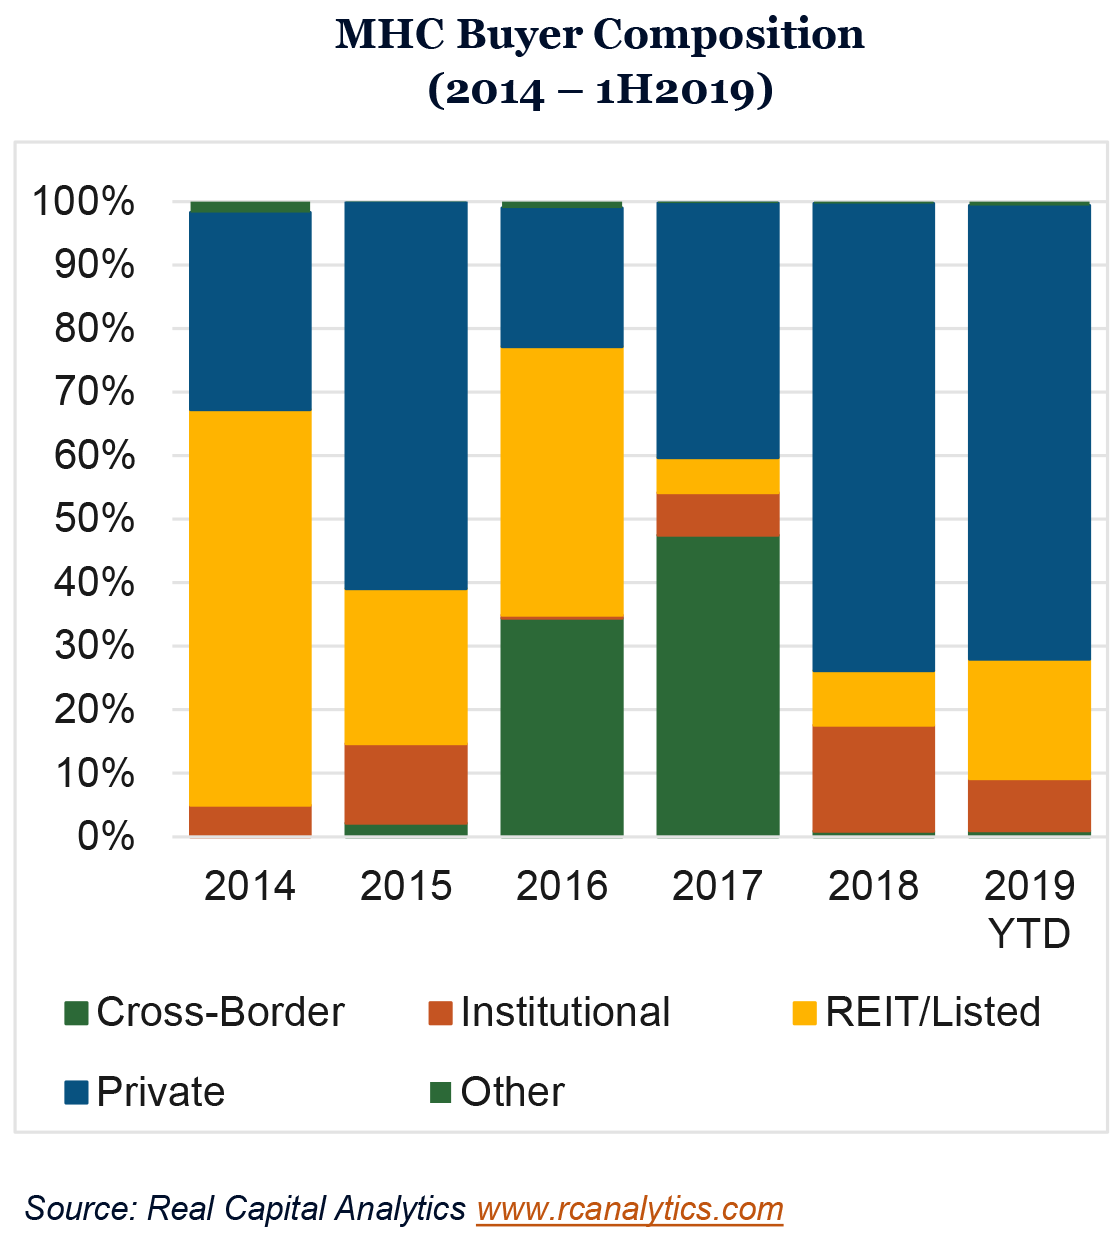 MHC Buyer Composition (2014 – 1H2019)